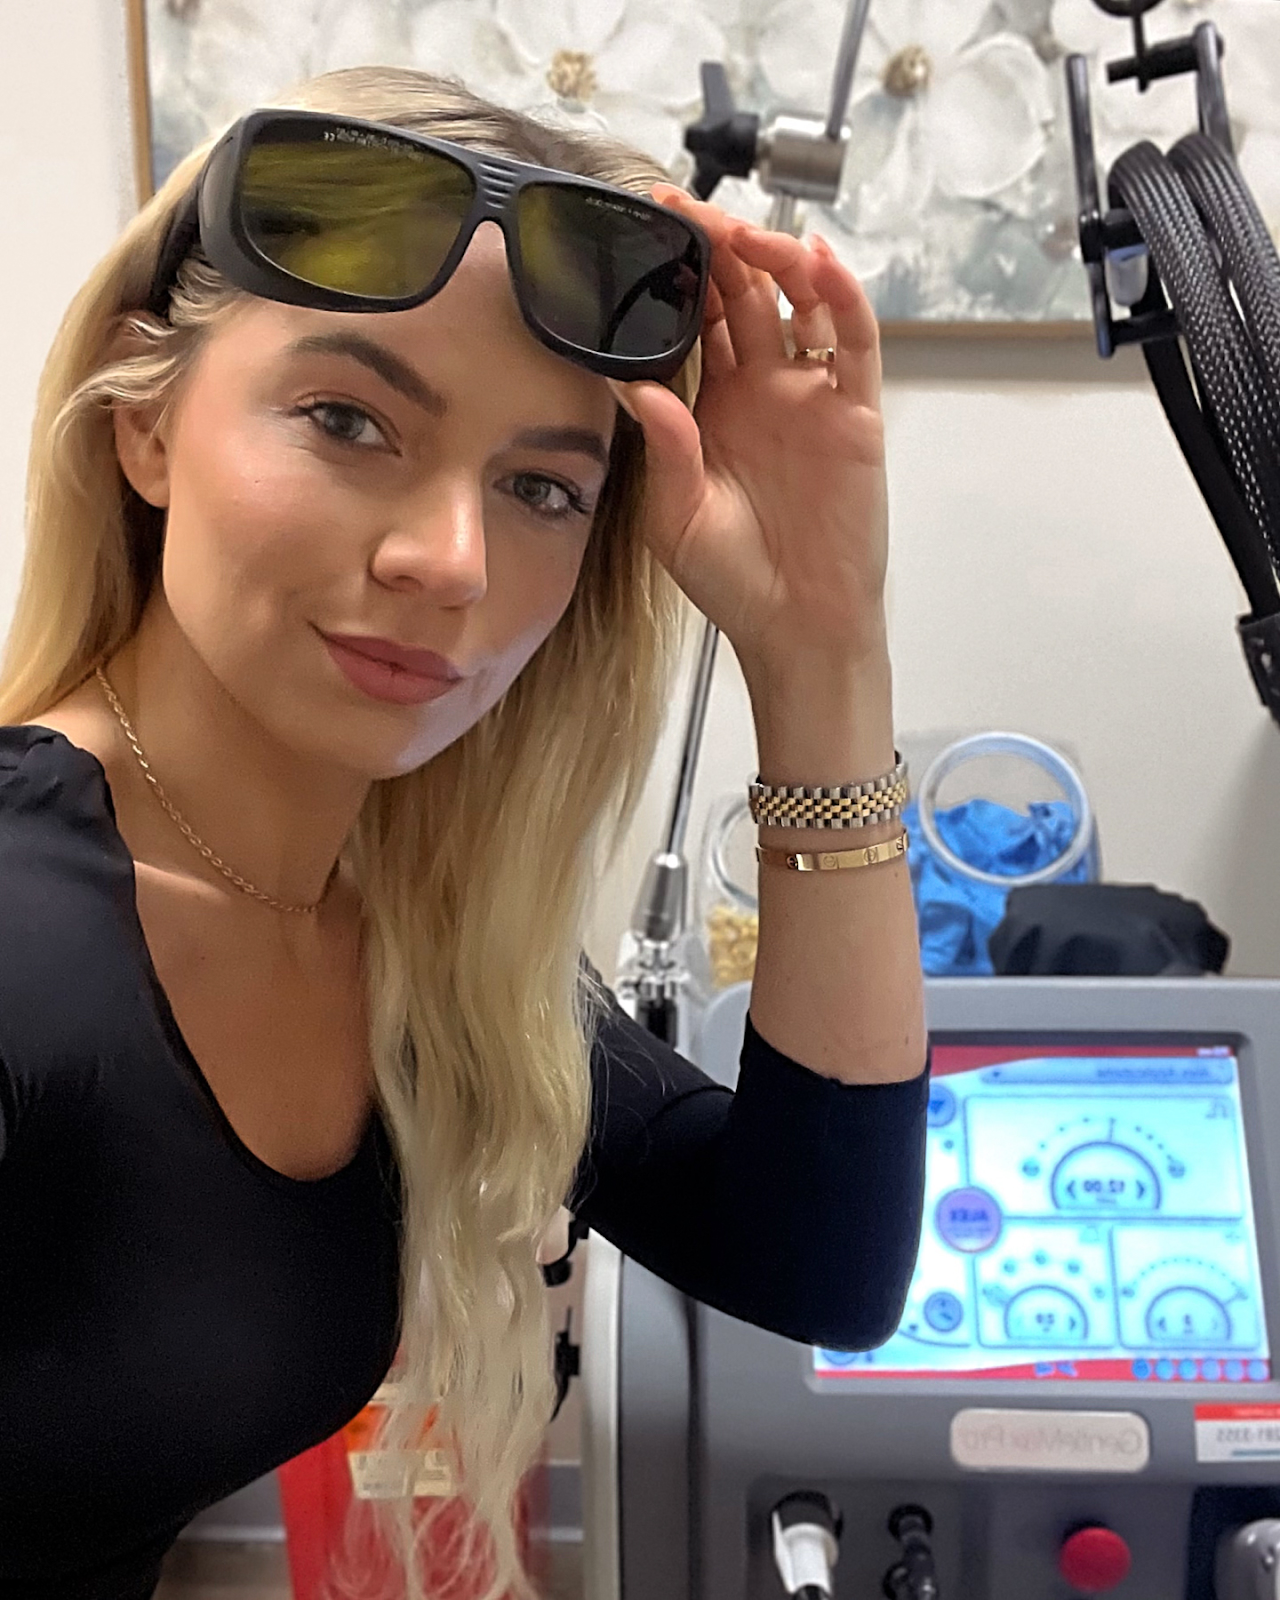 Milan Laser Hair Removal: Picture of a lady posing for a selfie in the clinic